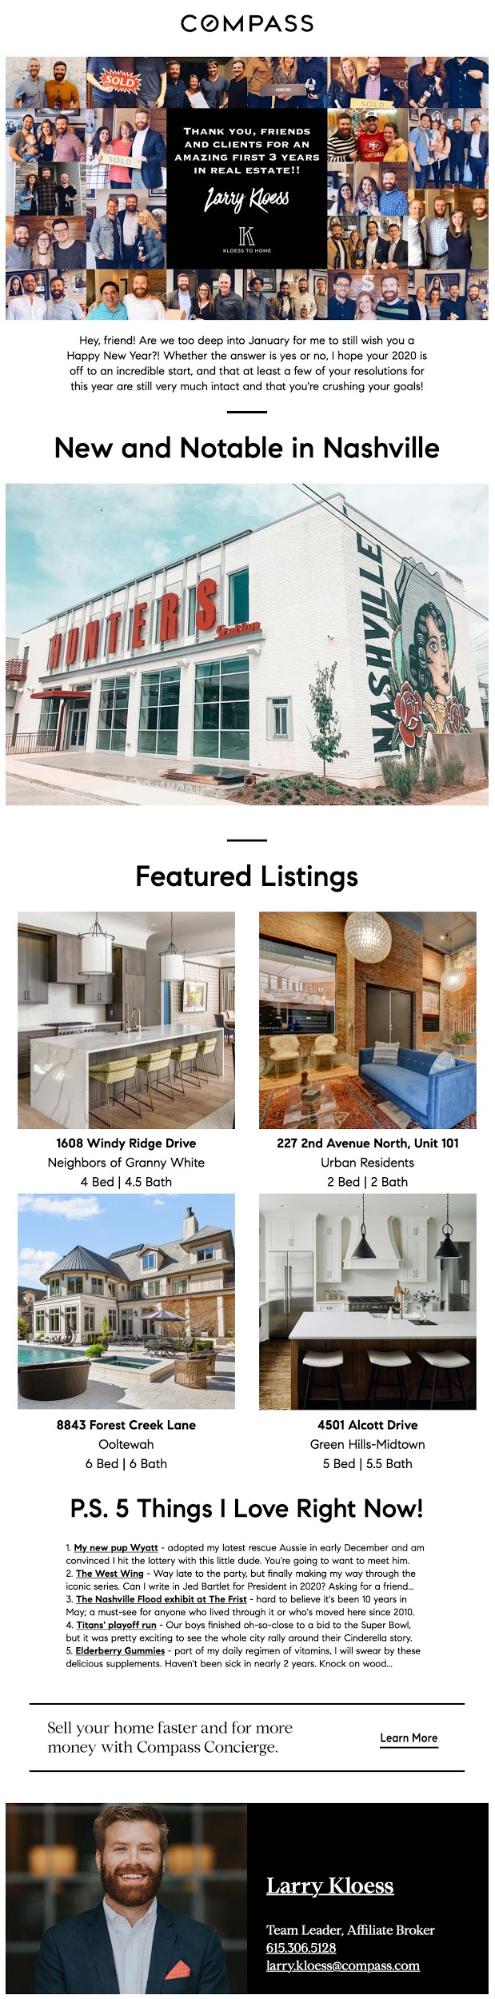 This realtor newsletter from Larry Kloess keeps his brand top of mind with highlights around his city and featured listings that month.